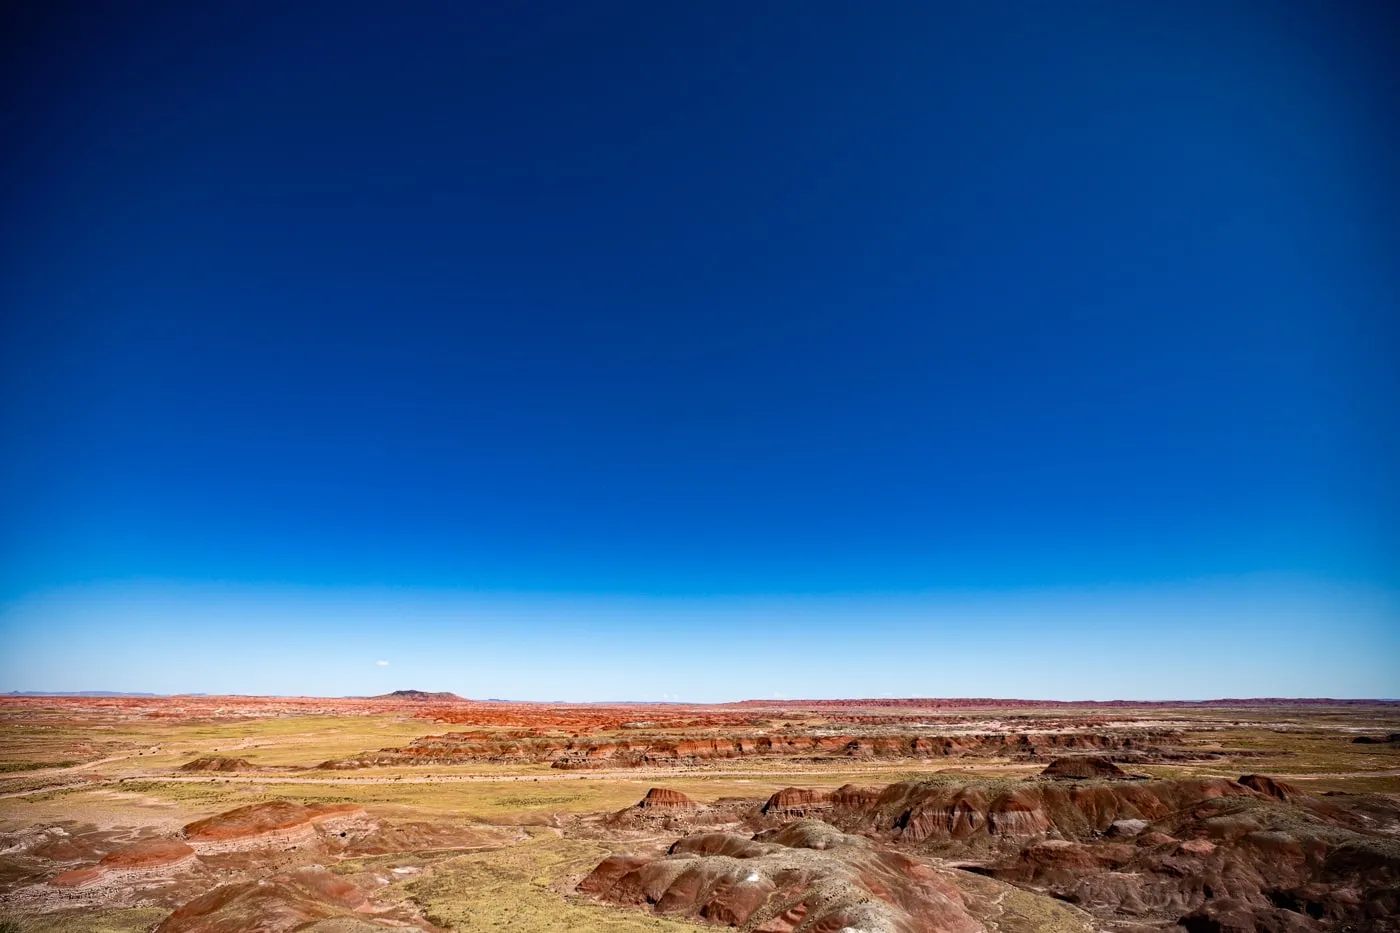 Petrified Forest National Park in Arizona - Painted Desert Overlooks